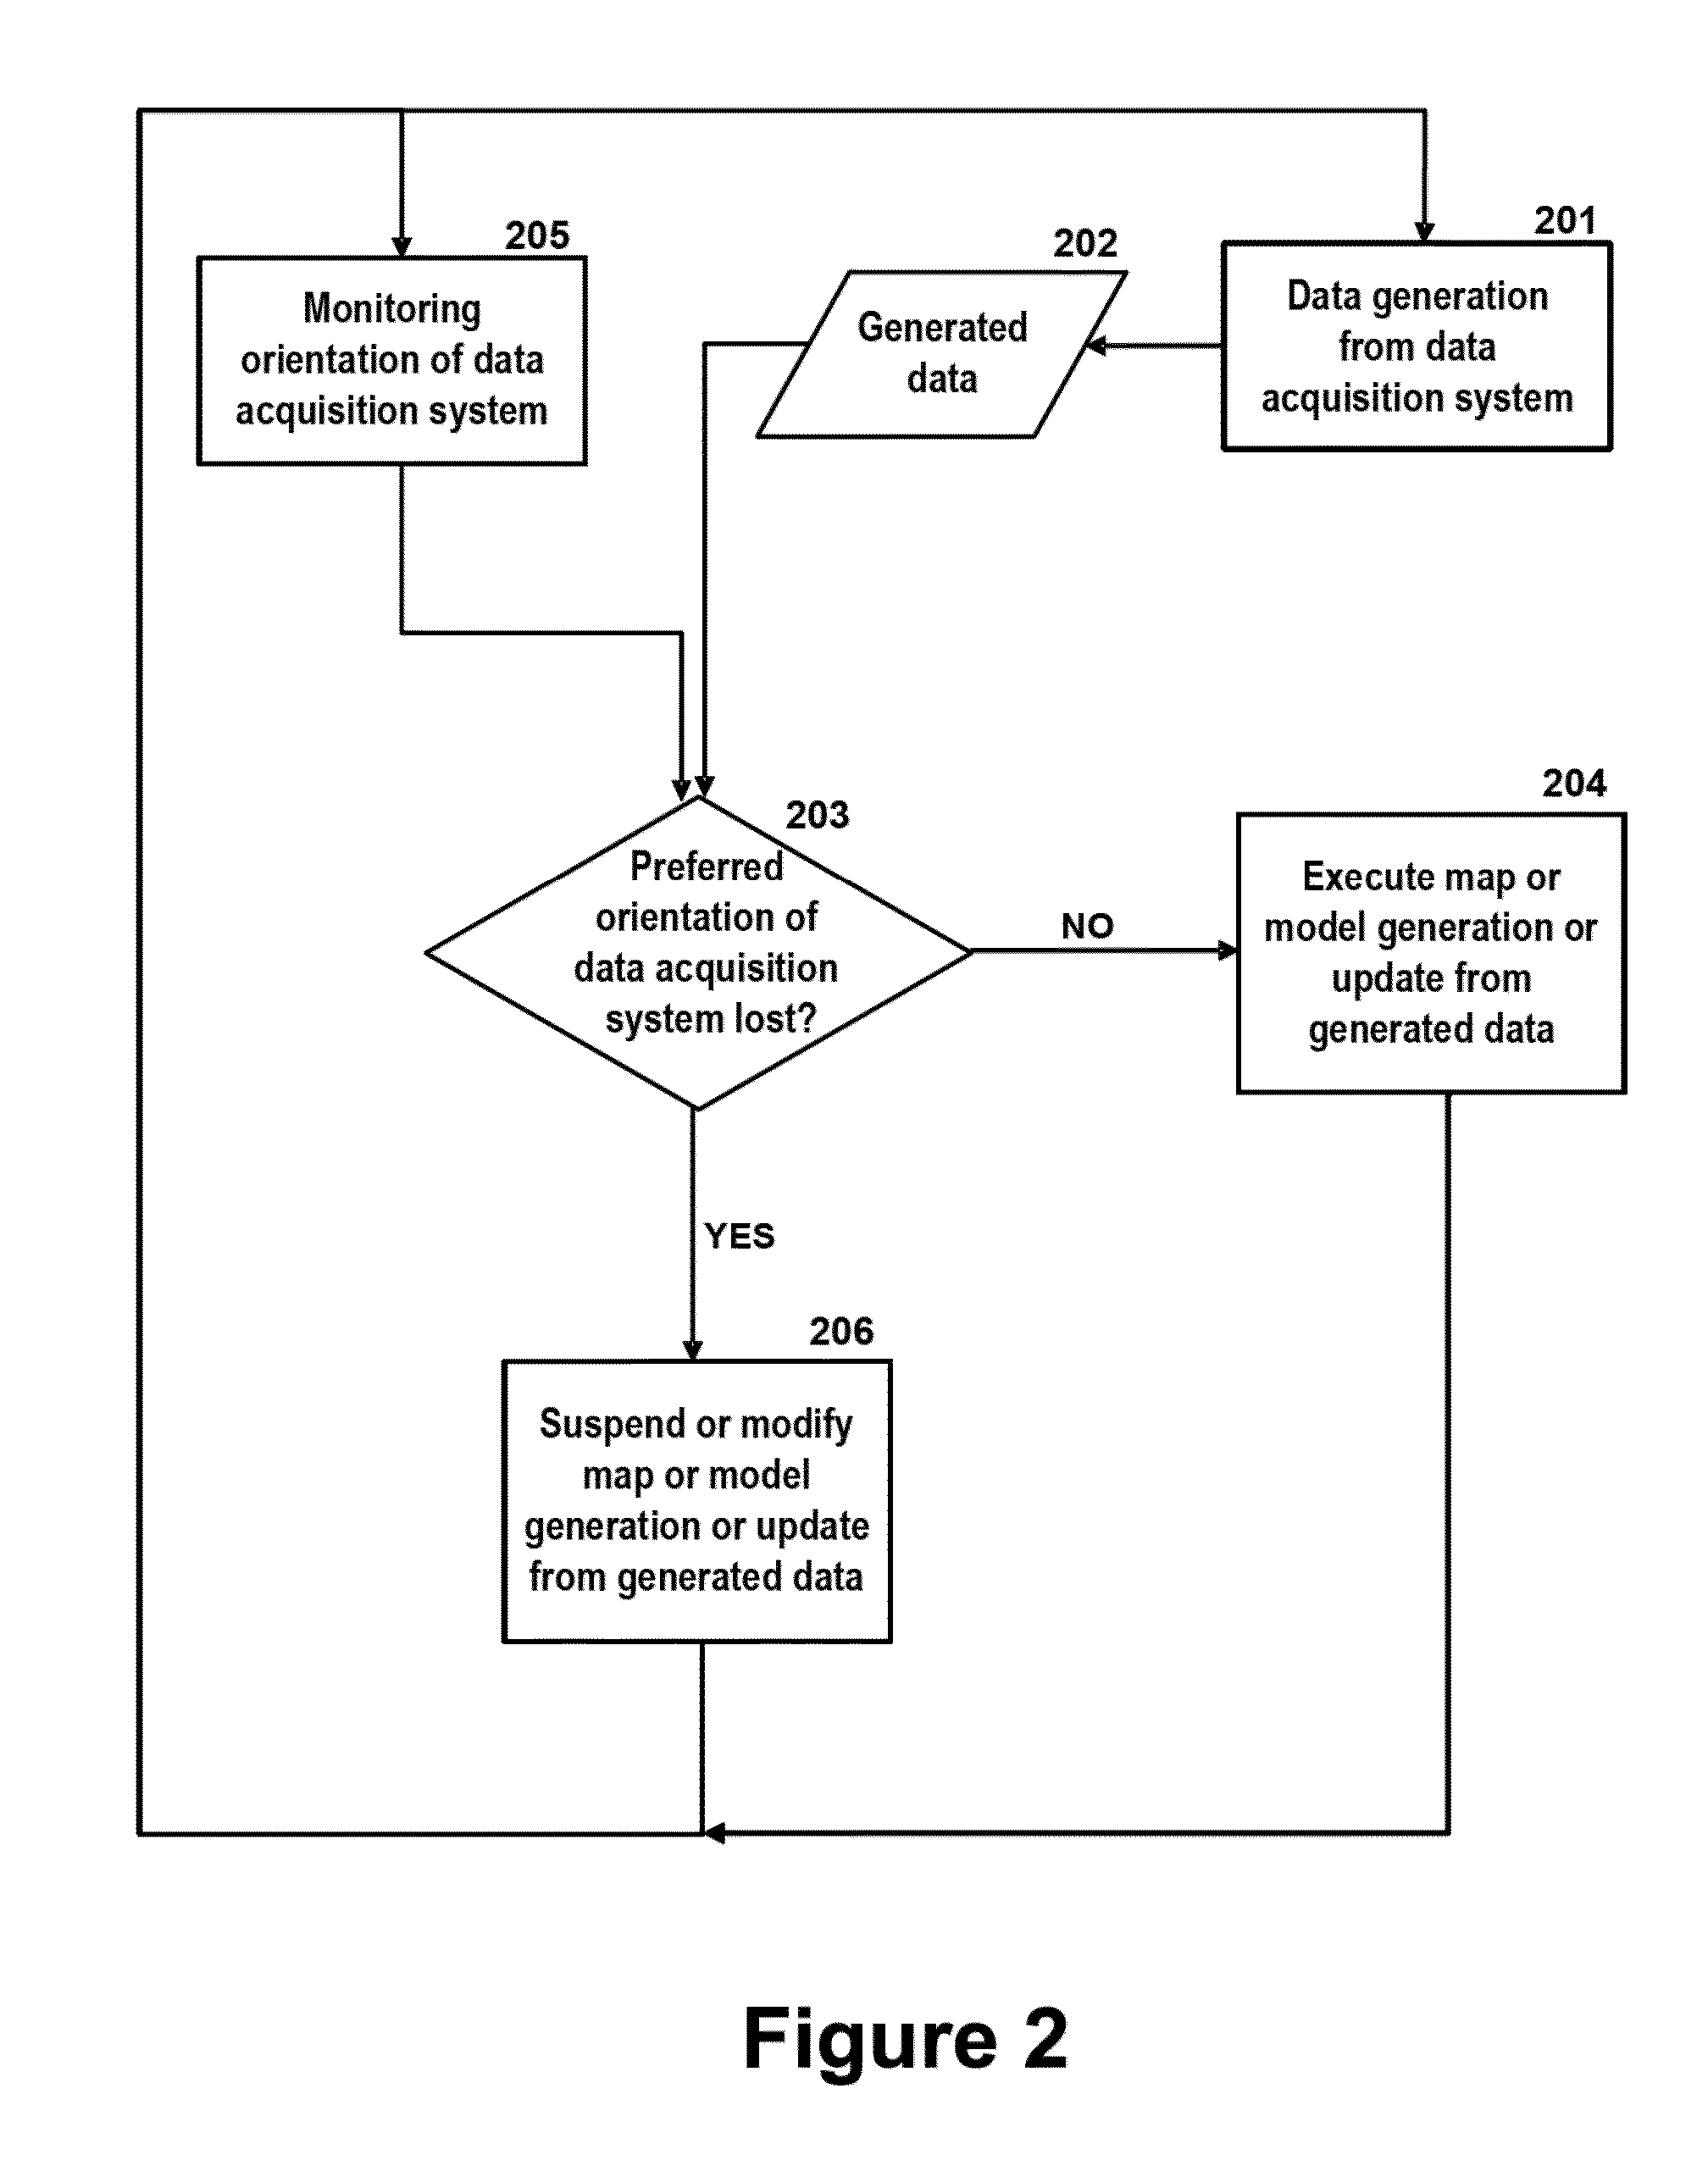 Method and apparatus for simultaneous localization and mapping of mobile robot environment